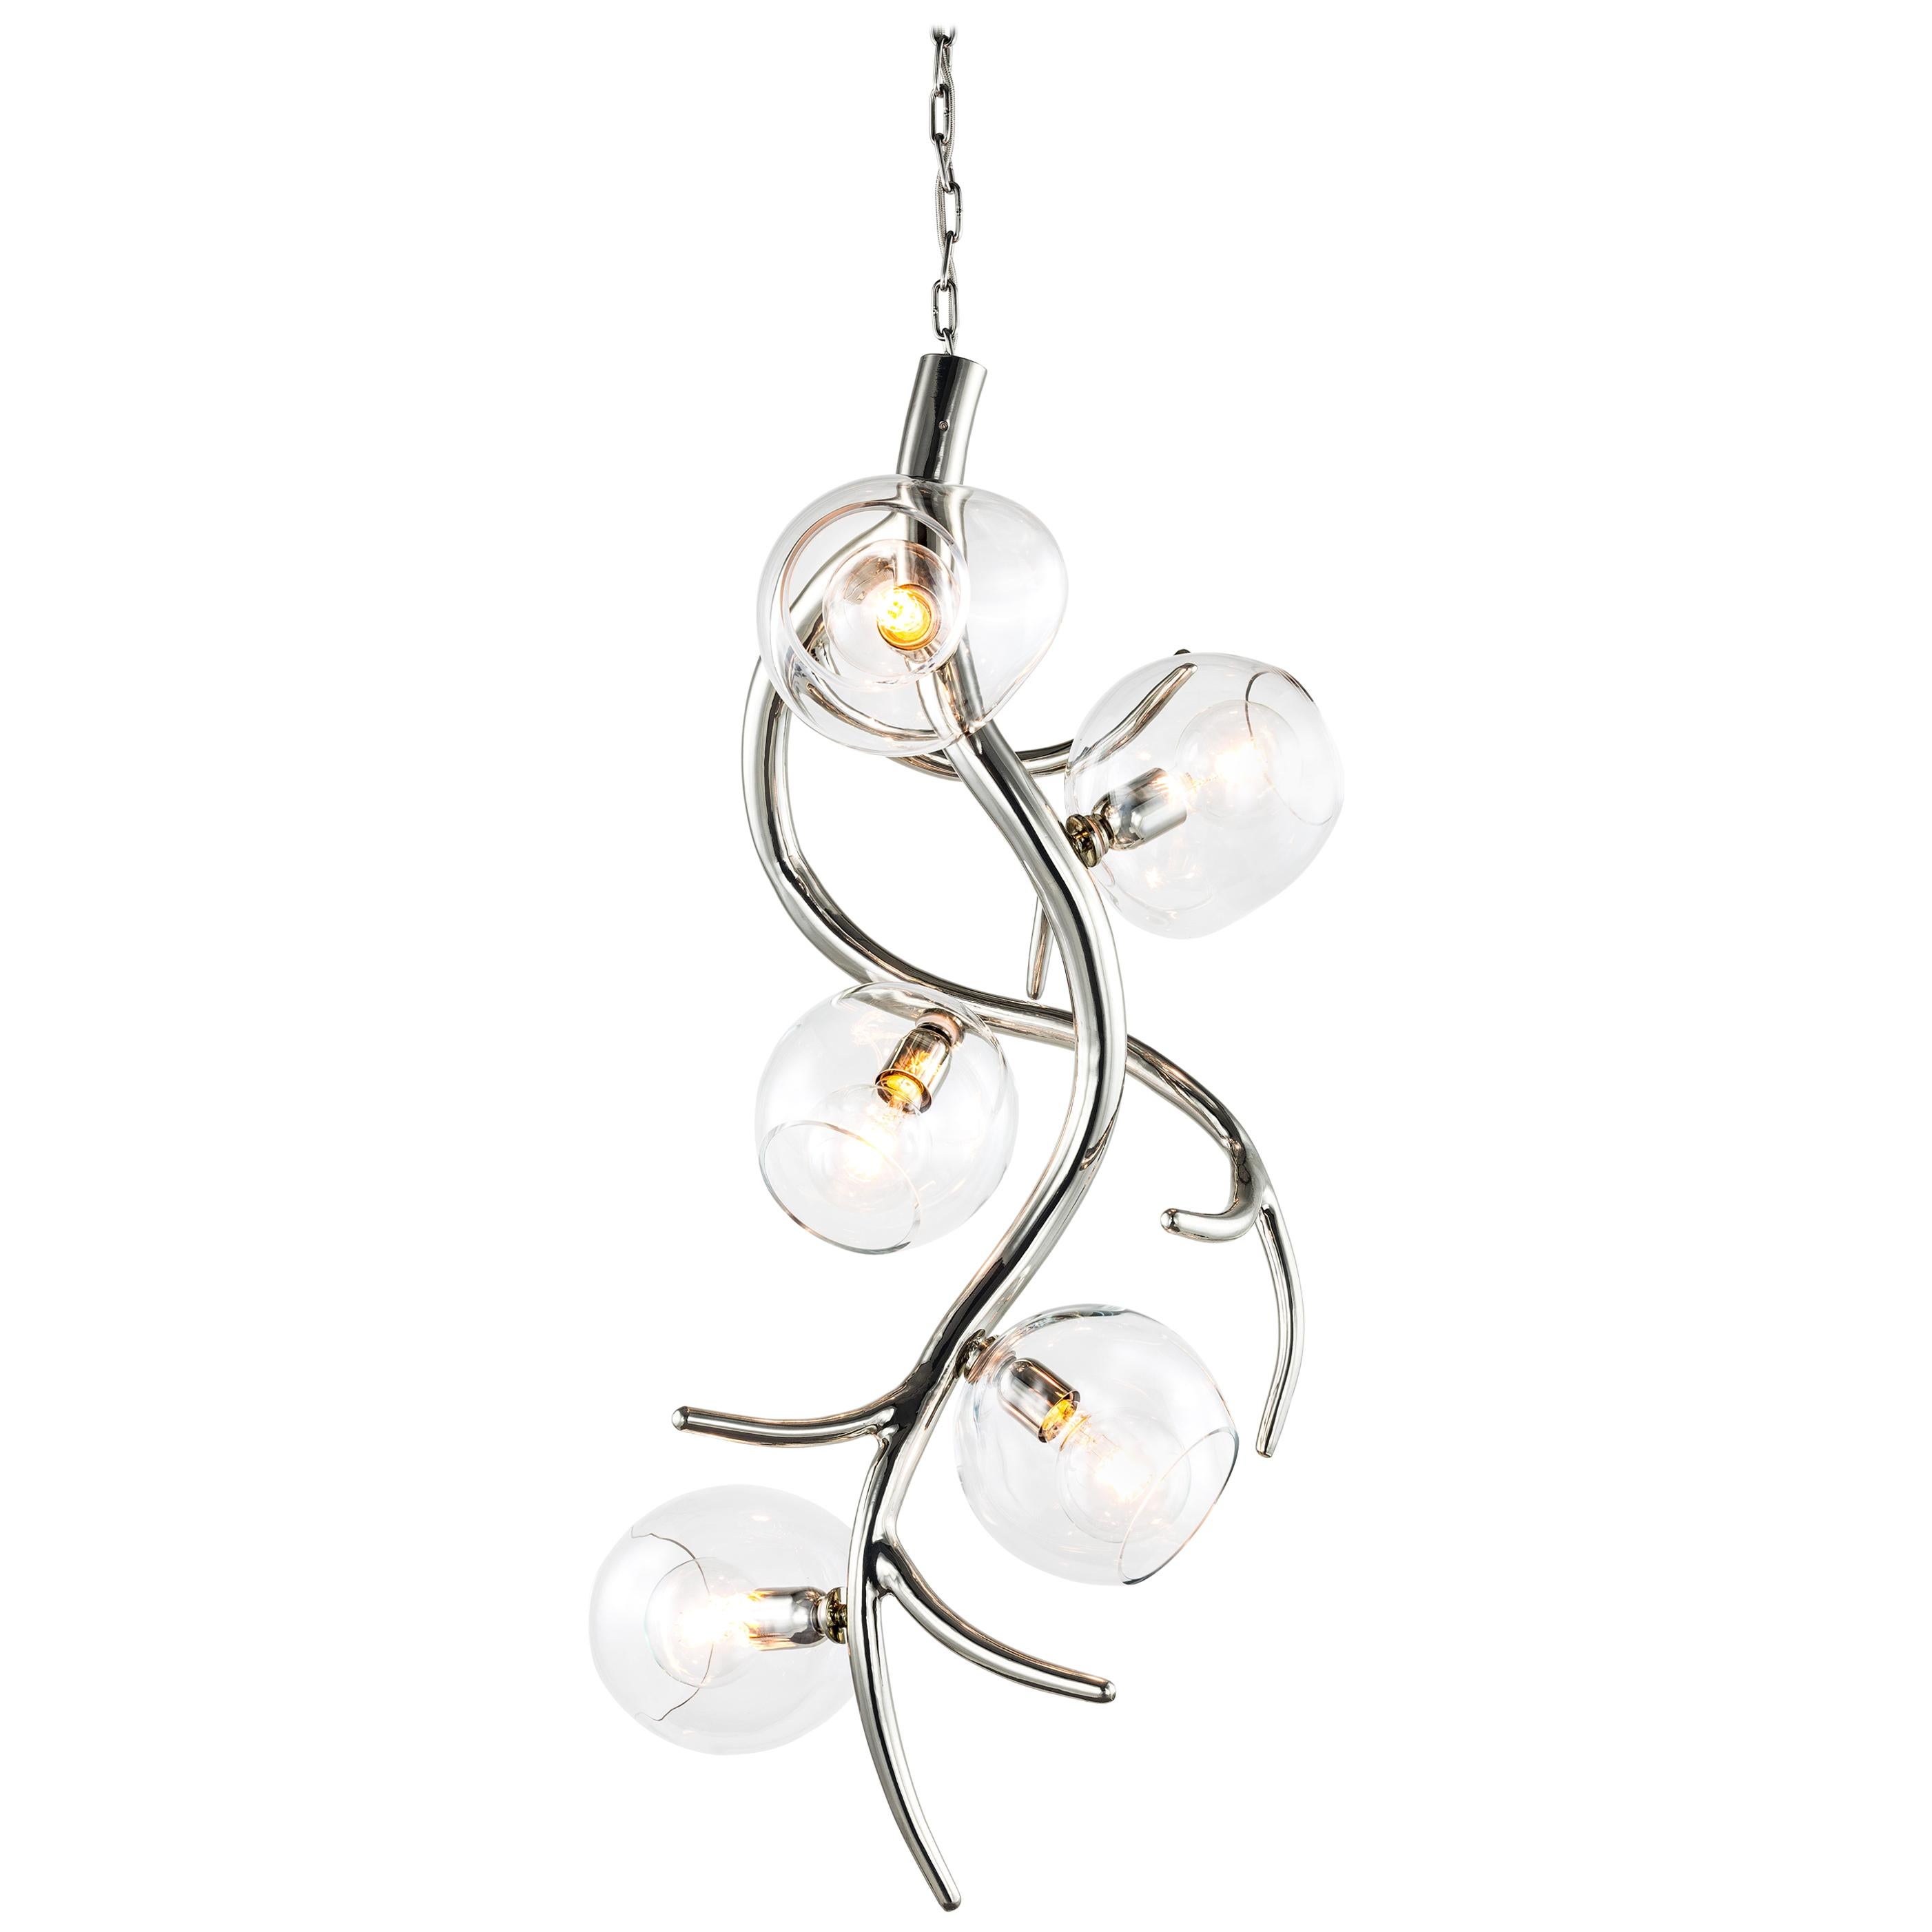 Modern Pendant with Colored Glass in a Nickel Finish, Ersa Collection, by Brand For Sale